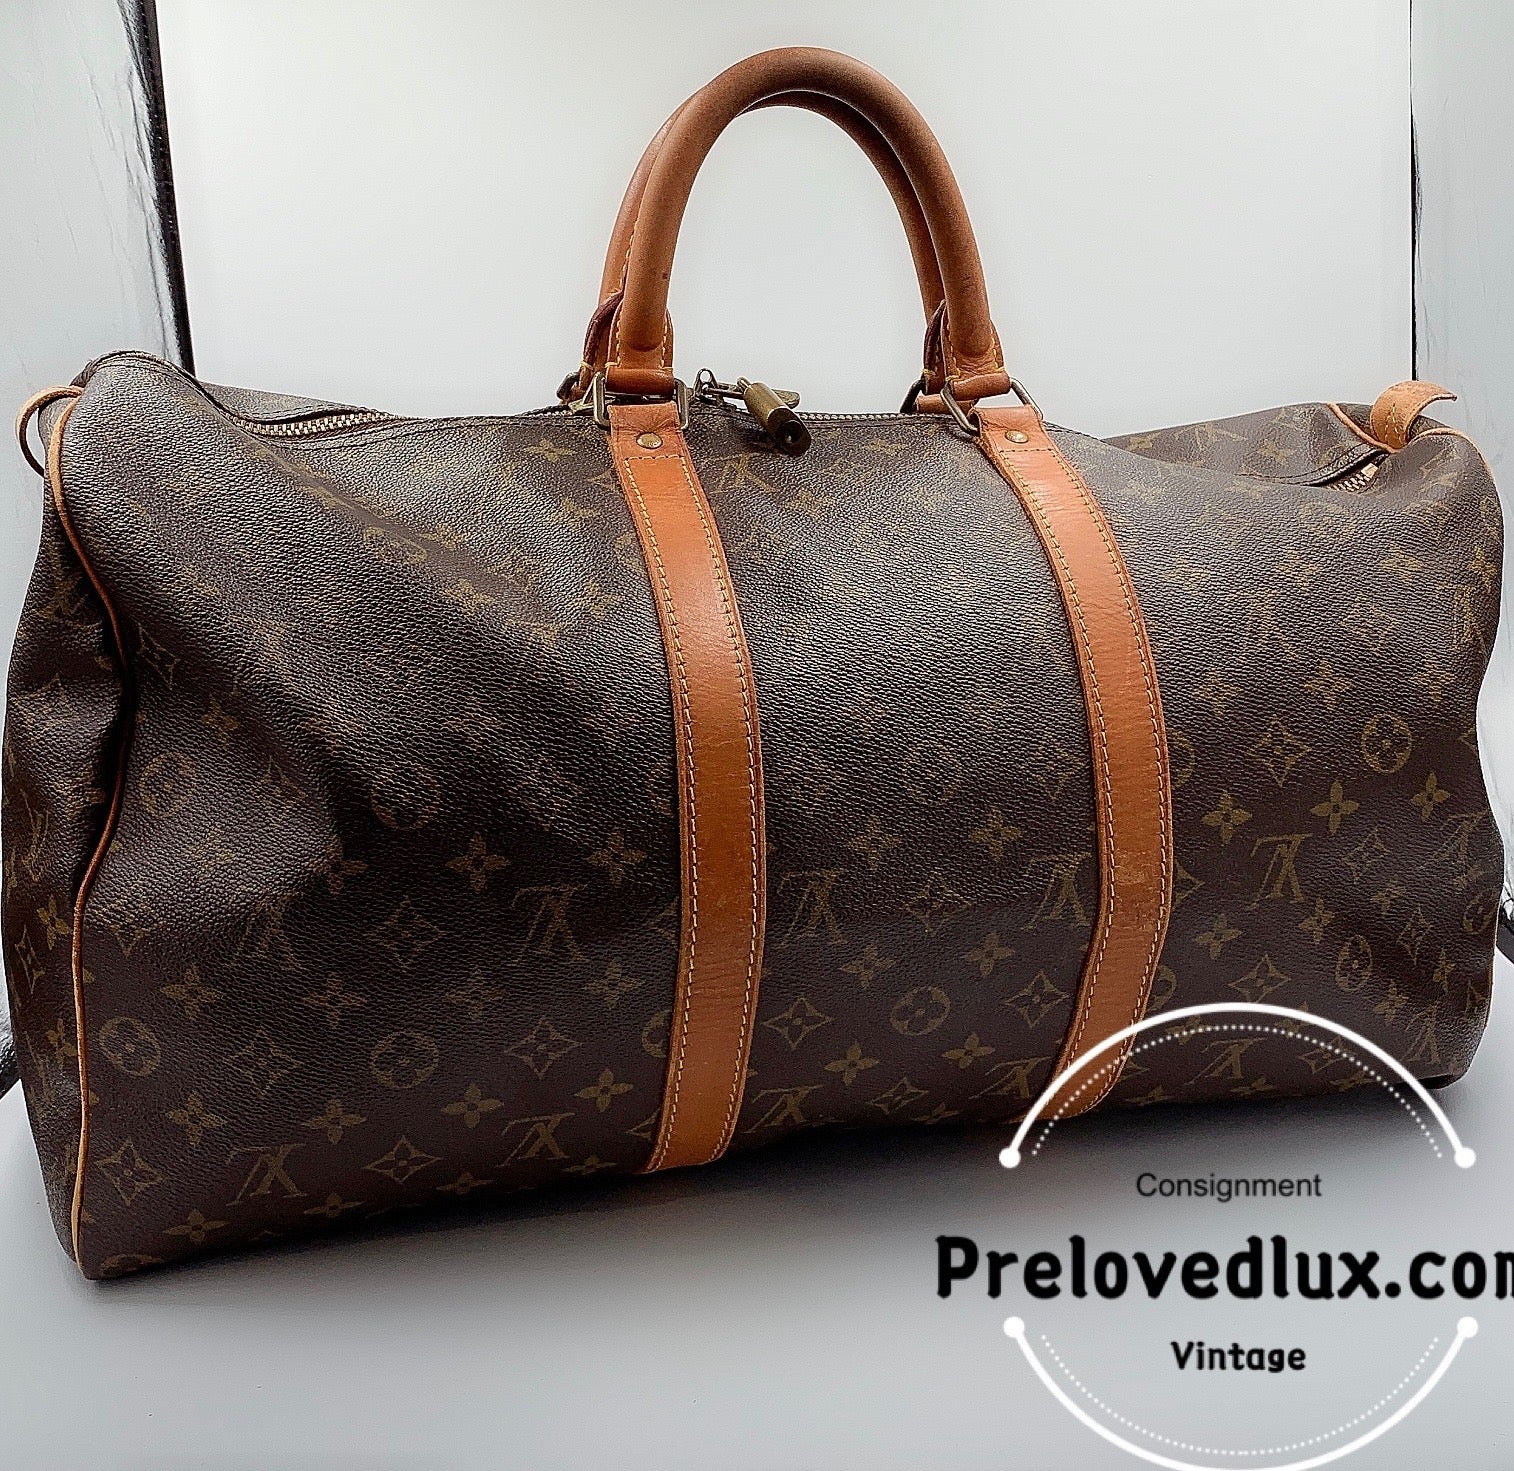 Monogram Keepall 45 Duffle Bag (Authentic Pre-Owned) – The Lady Bag